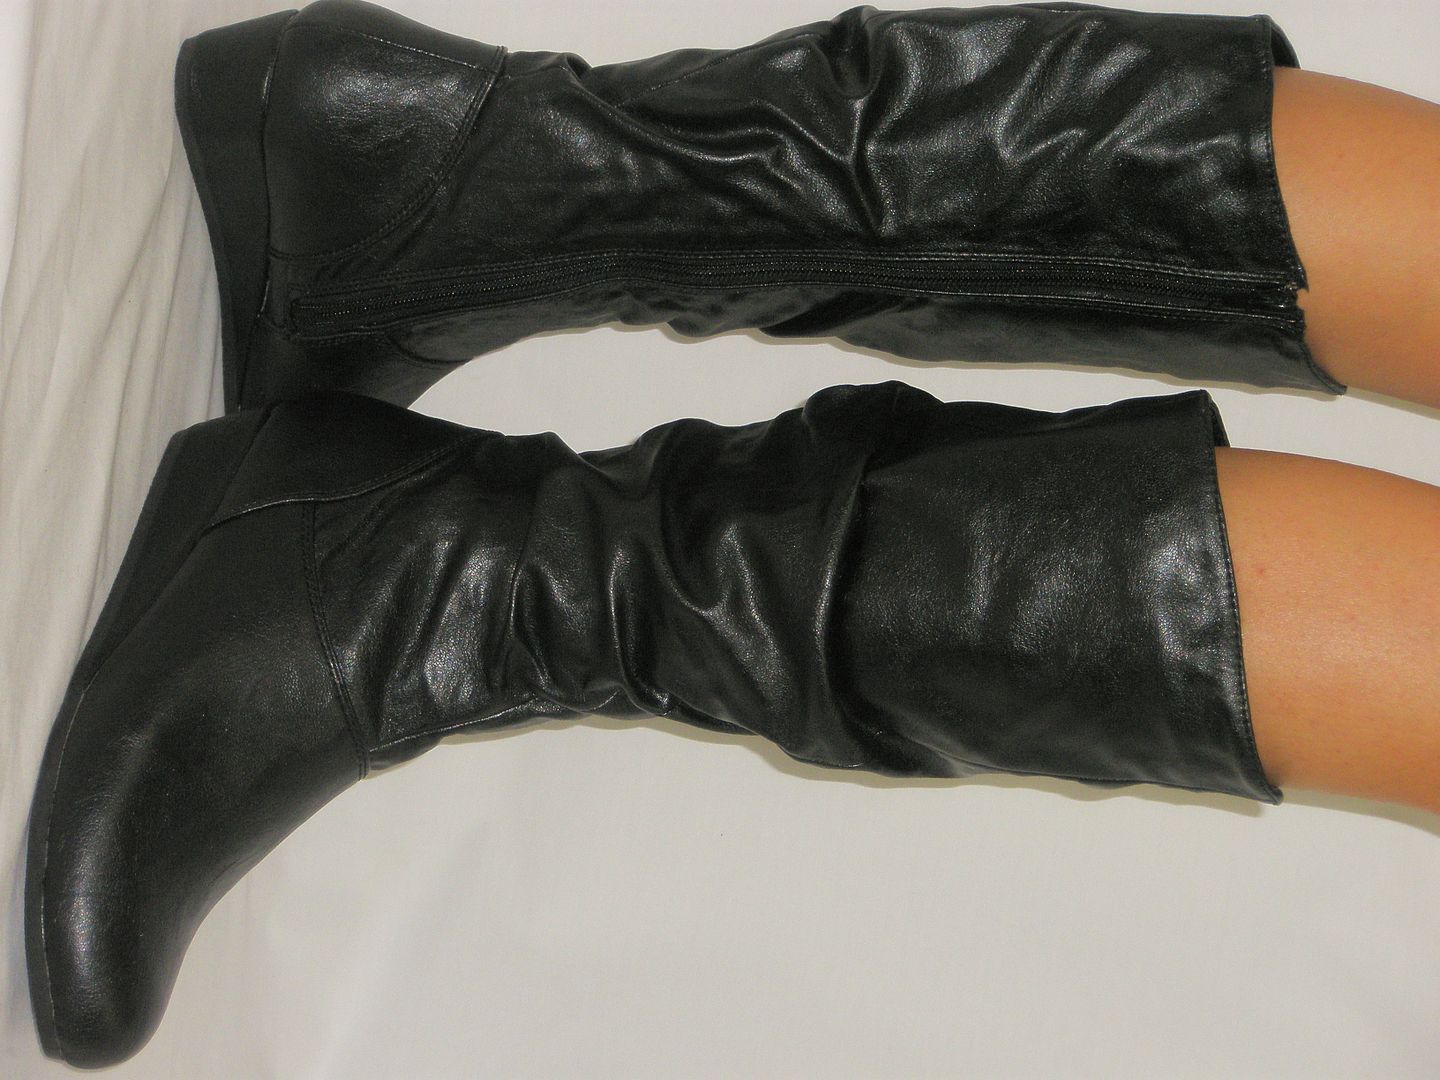   Sexy Slouchy Flat Boots *Low Wedge Heel Provides Great Support*  